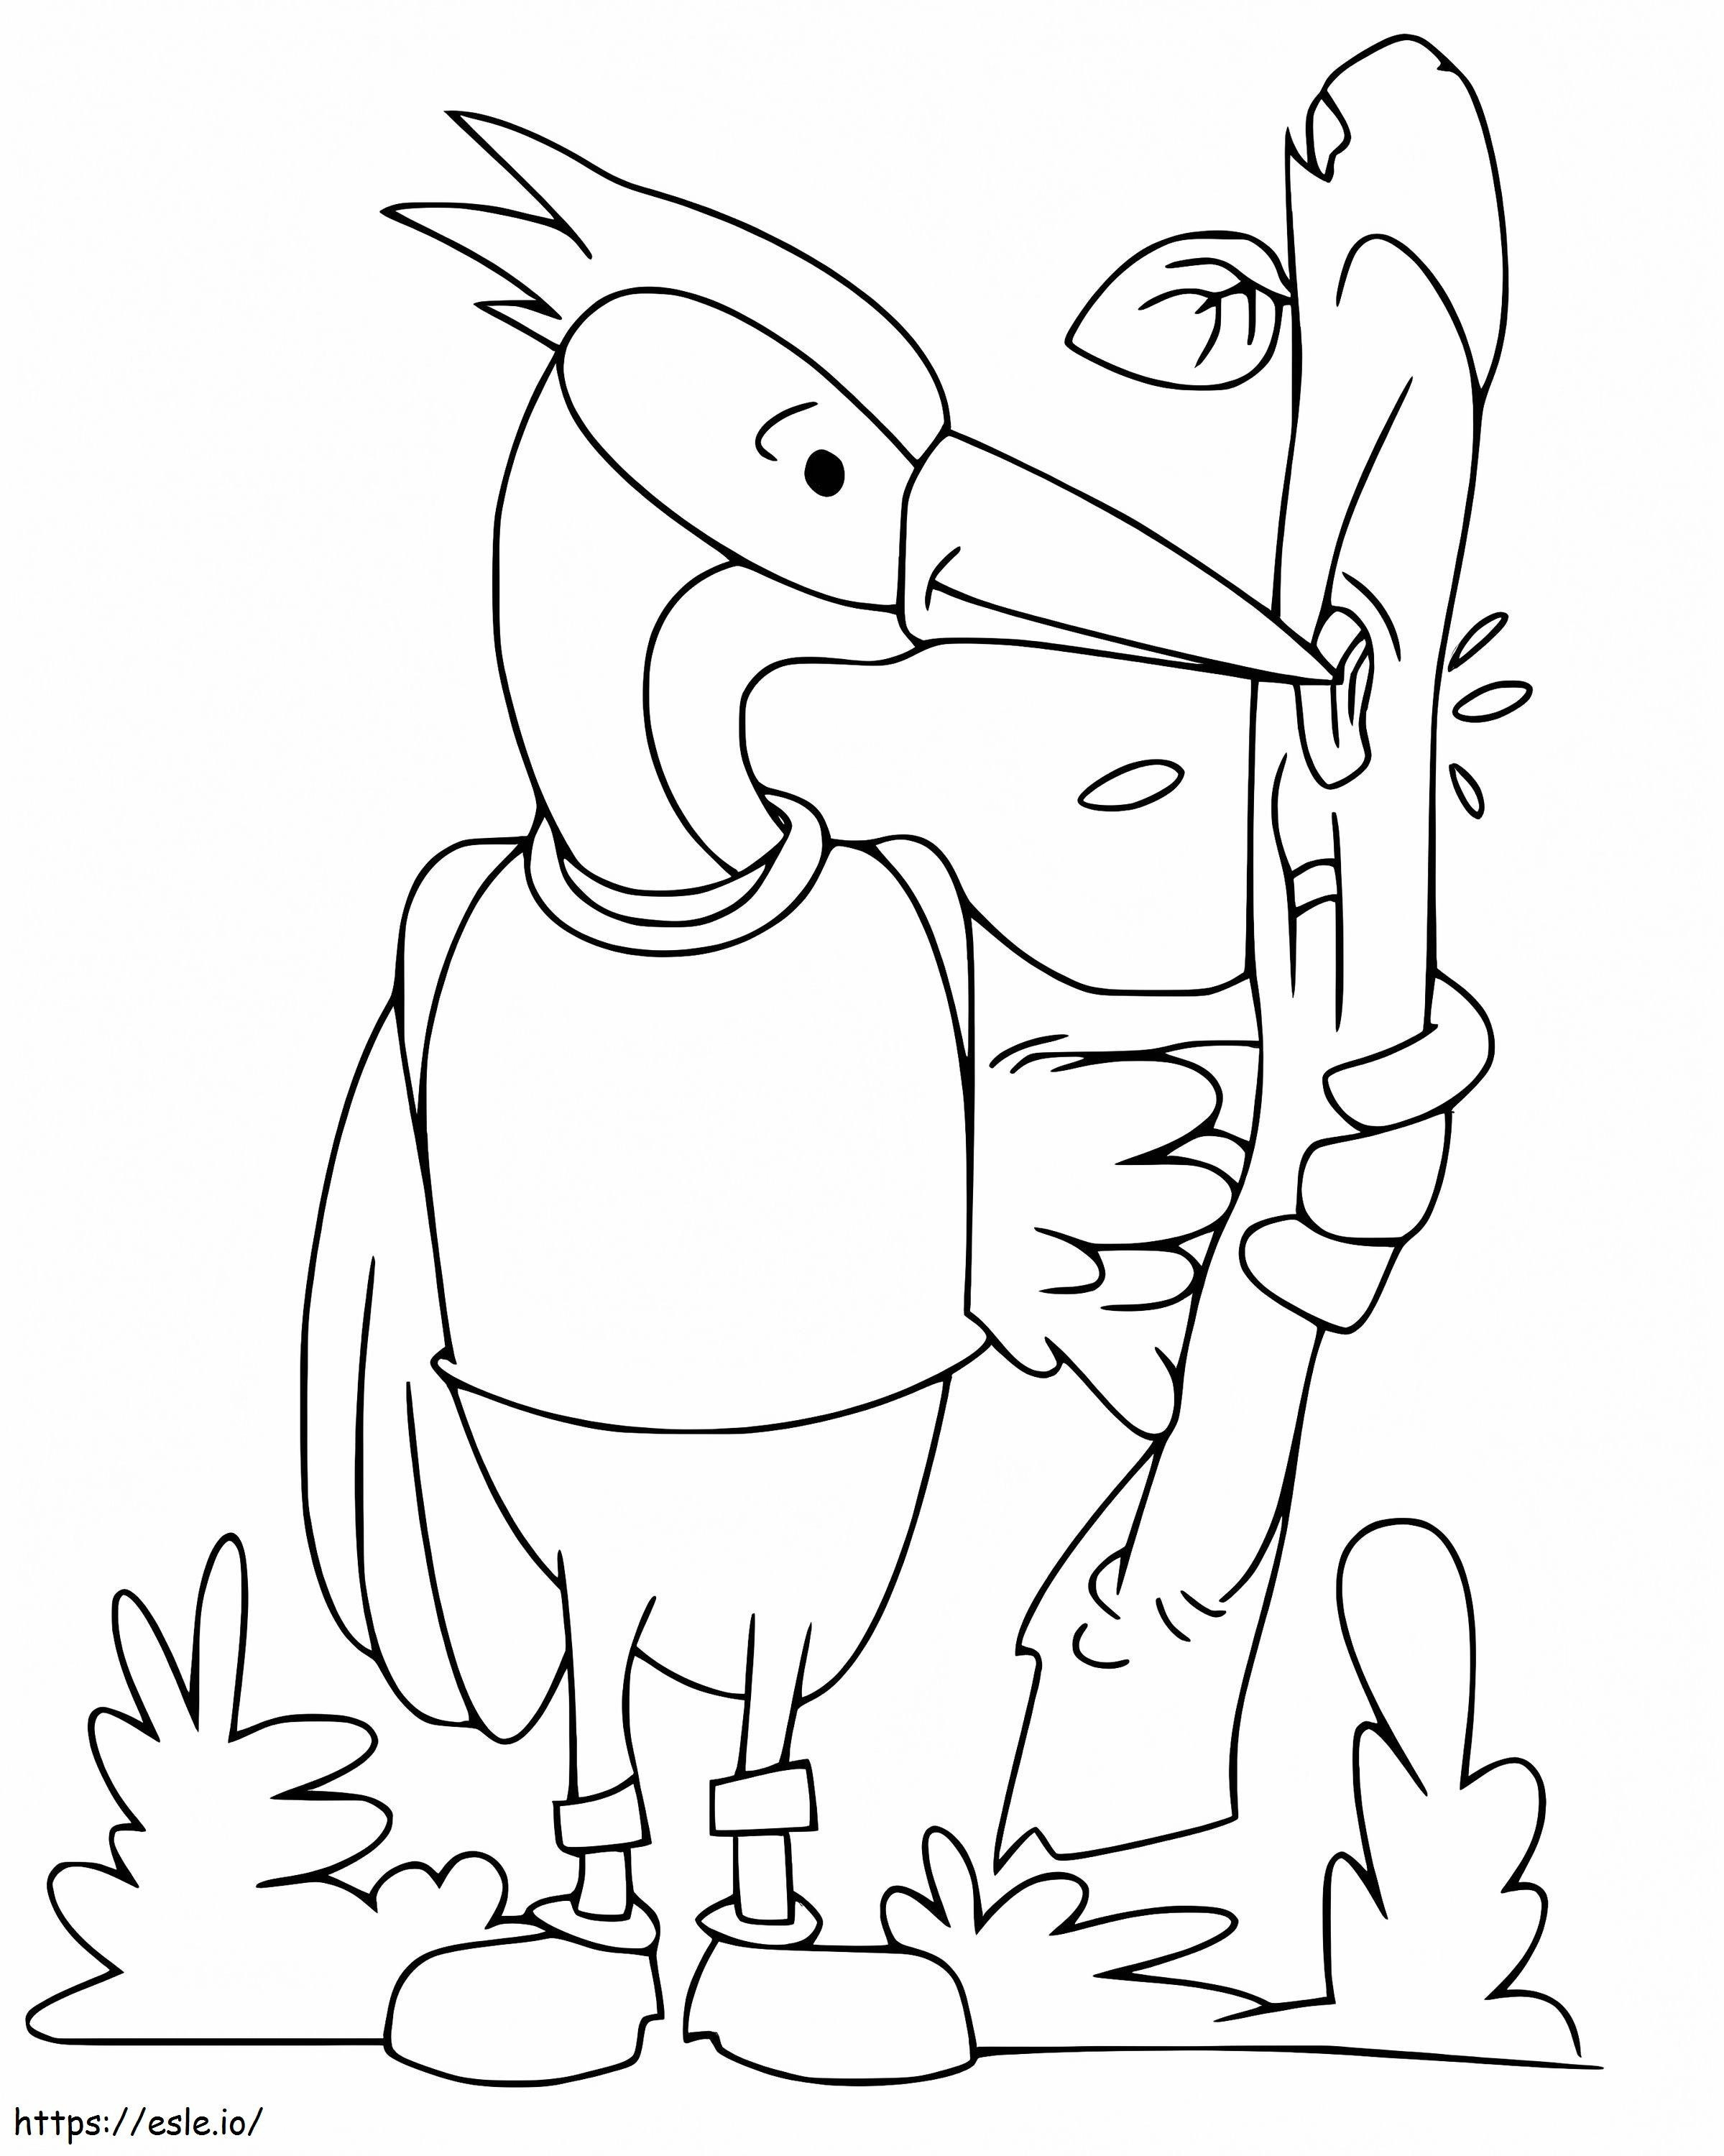 Animated Woodpecker coloring page